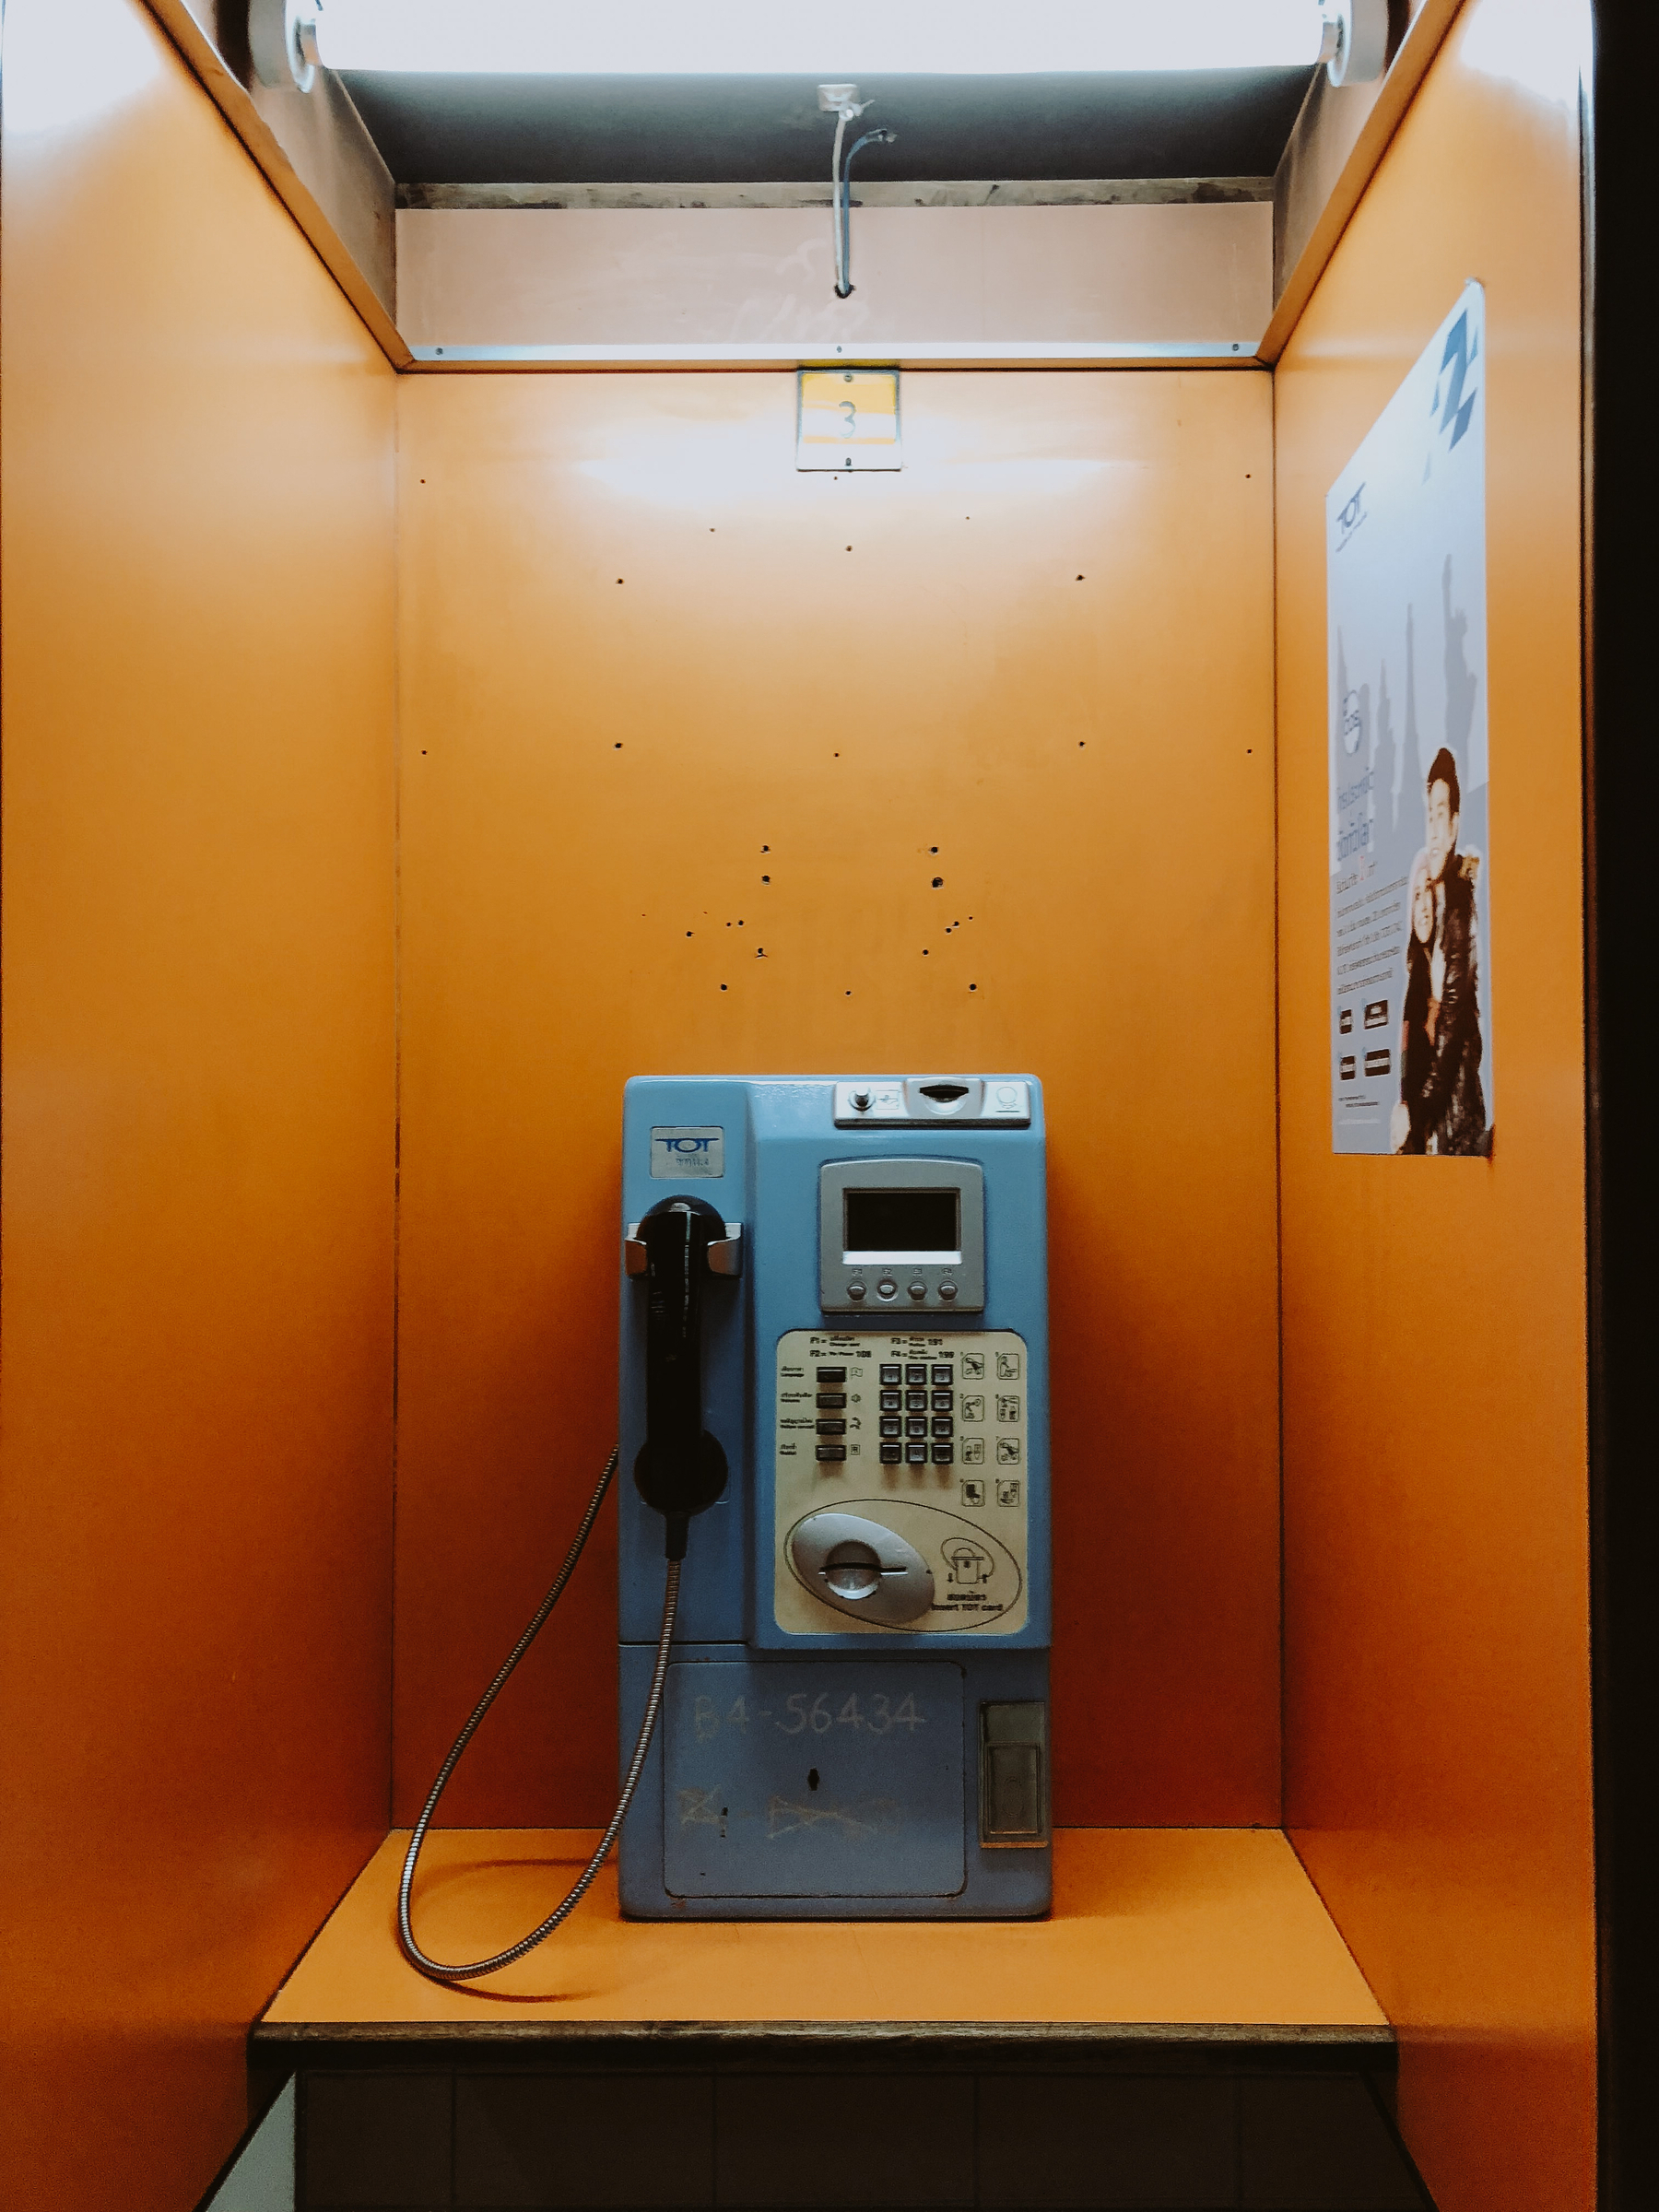 A blue pay phone, on an orange booth. 